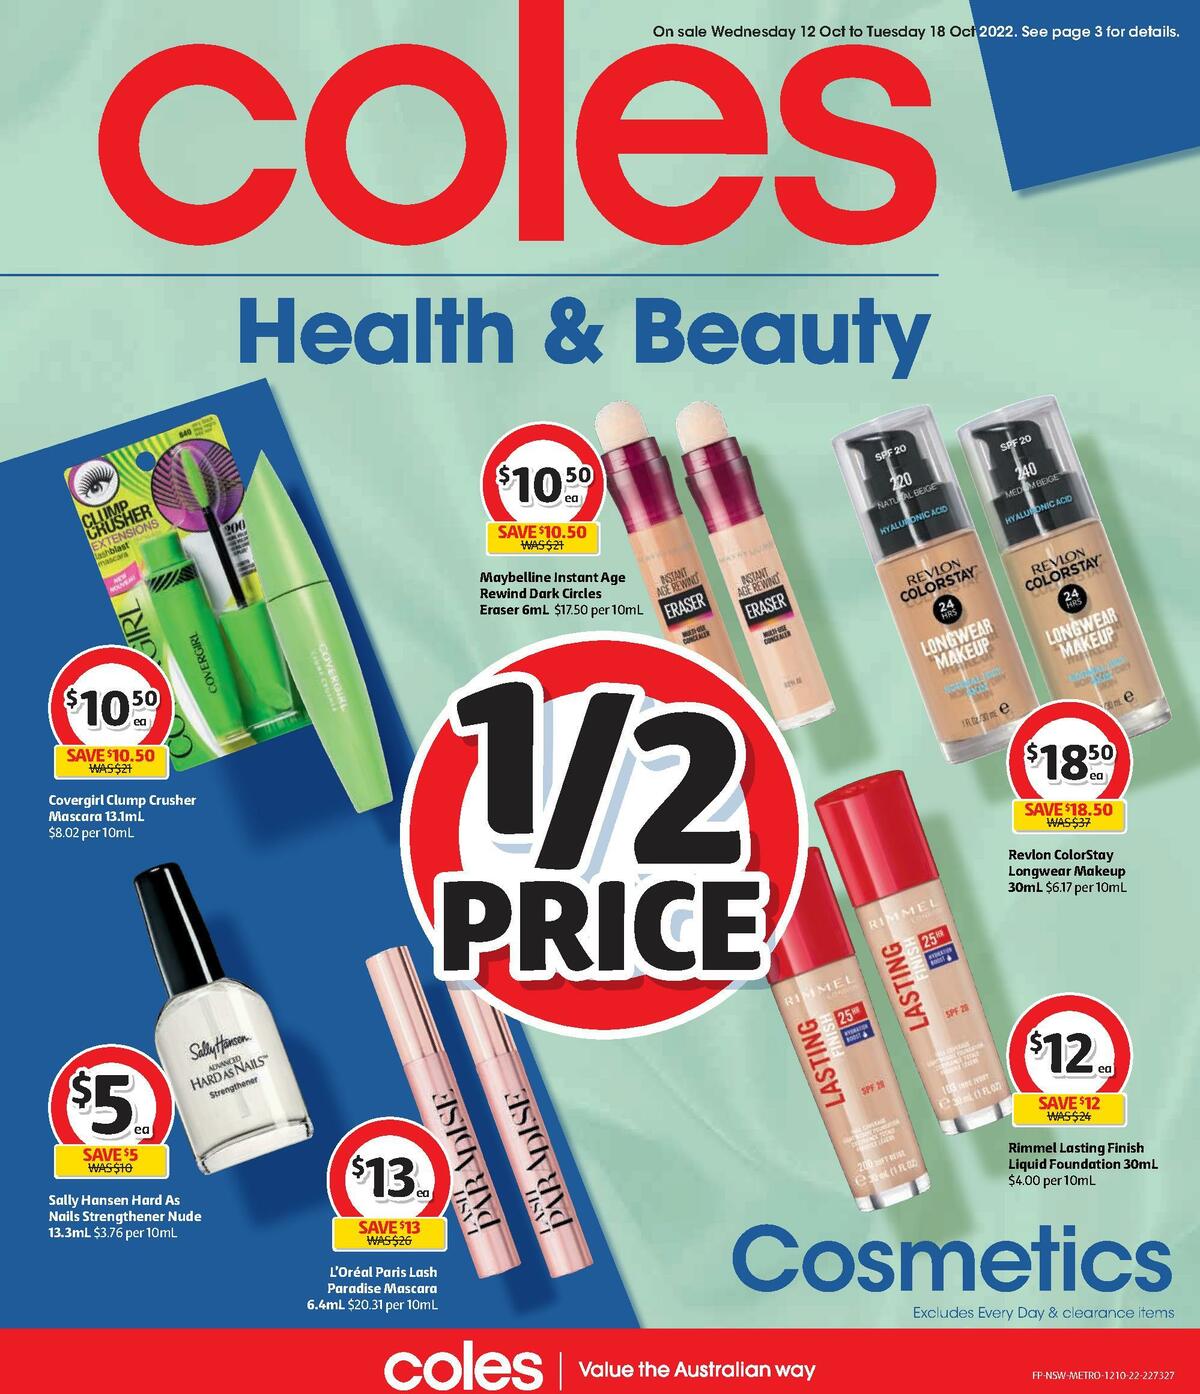 Coles Health & Beauty Catalogues from 12 October